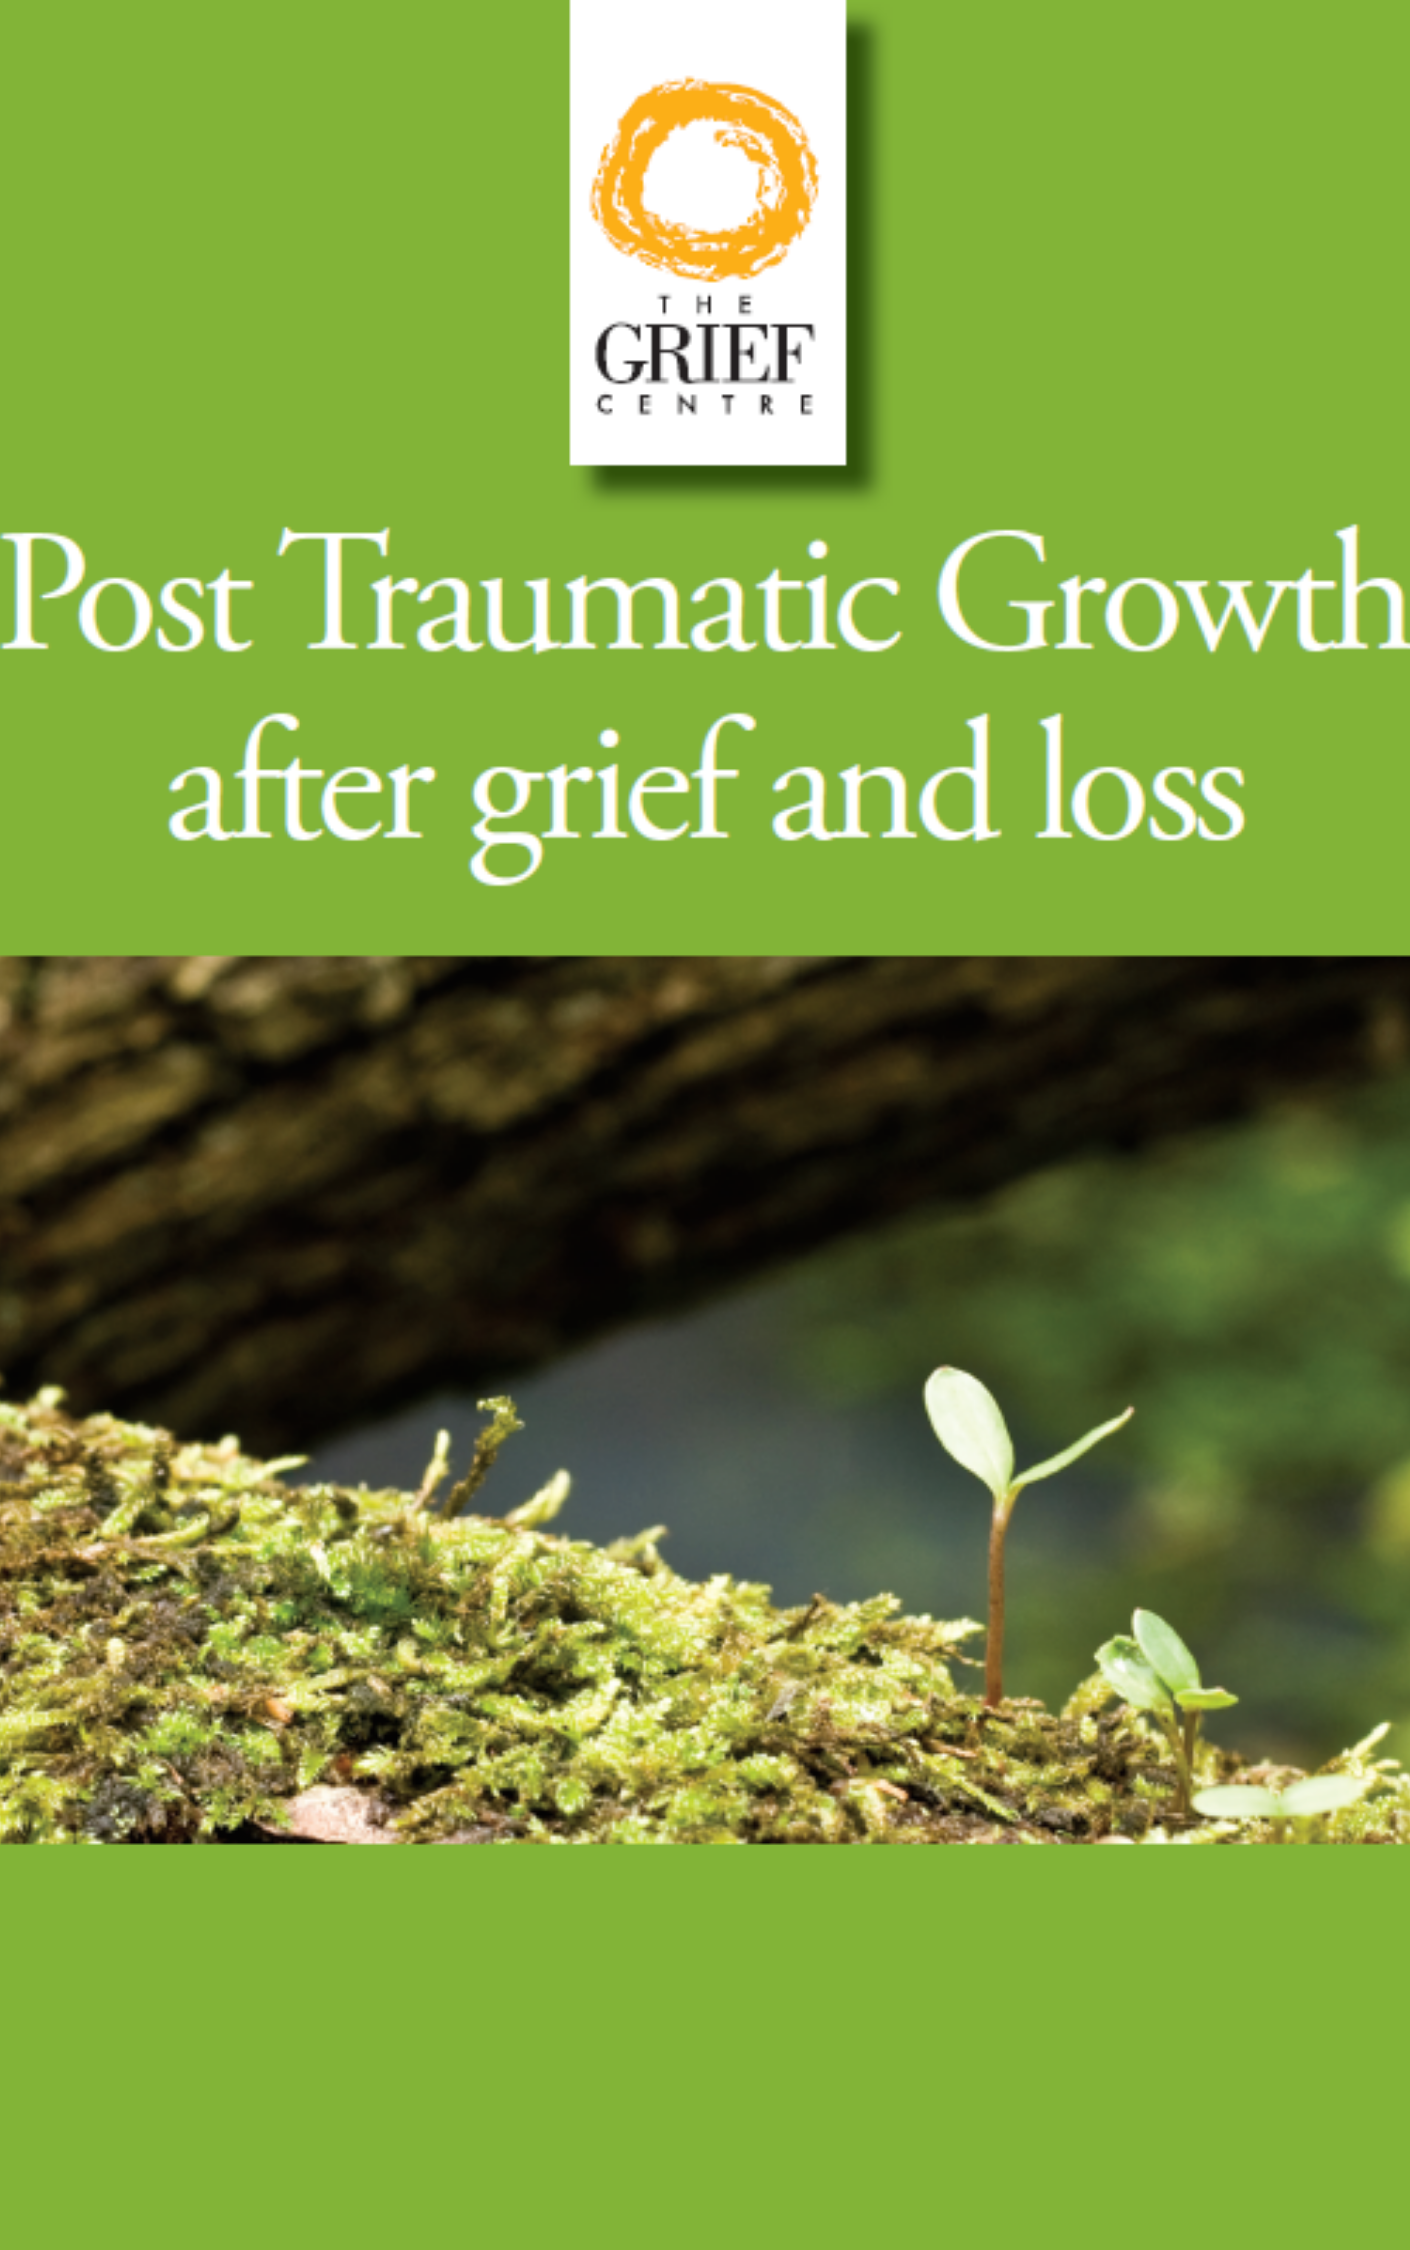 Post Traumatic Growth After Grief and Loss Booklet